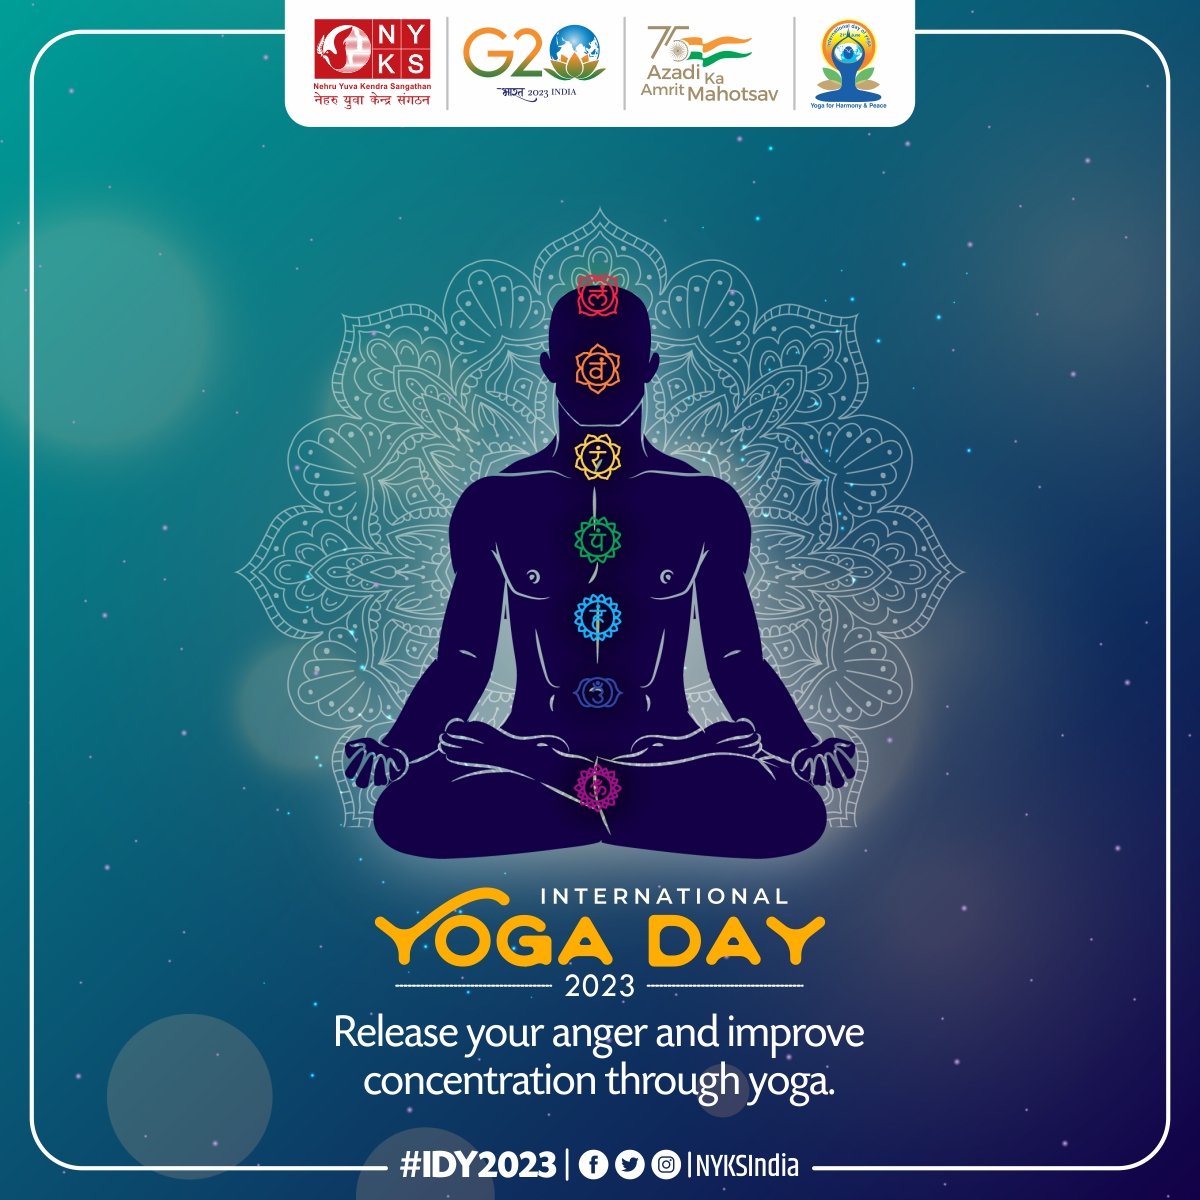 Align your mind and body with yoga🧘

#NYKS4Yoga #HealthyLifestyle #Fit #Yoga #FitIndia